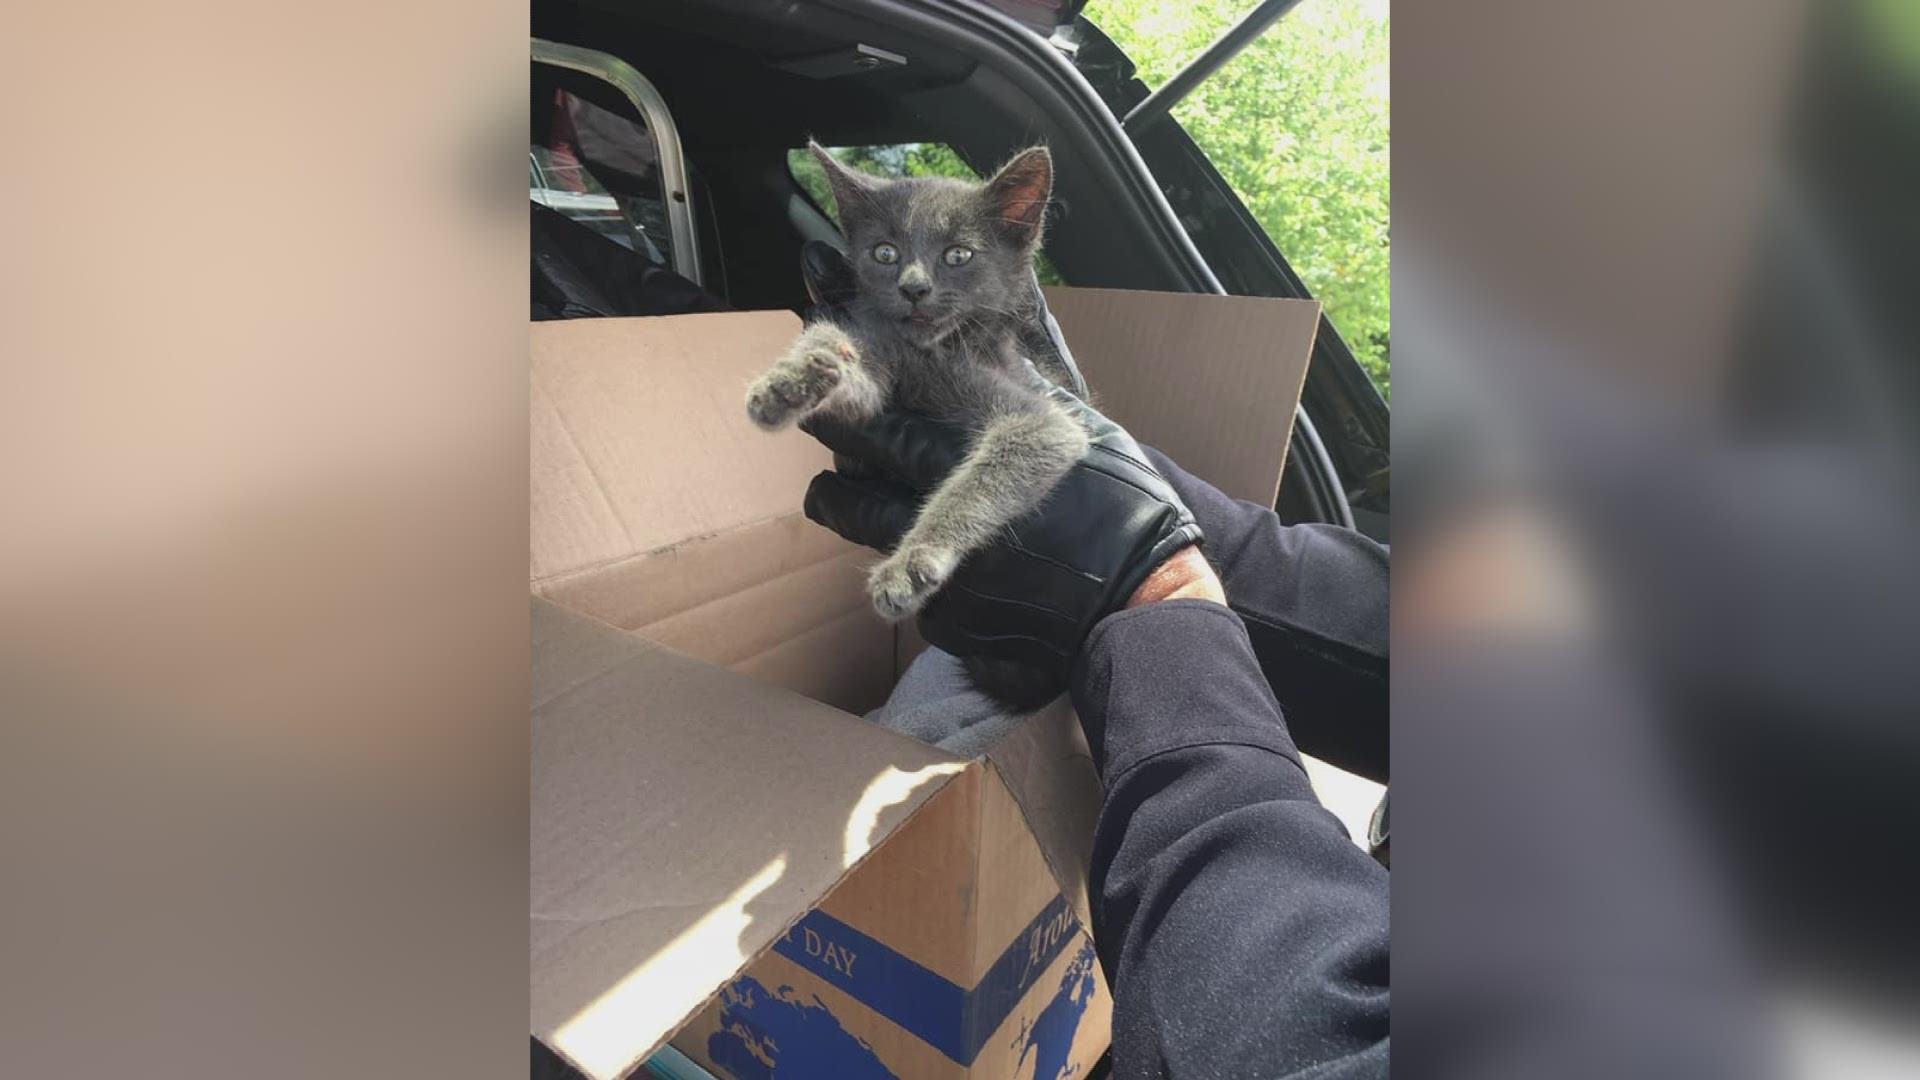 Cumming Police Officer decides to adopt kitten rescued from the engine of vehicle.